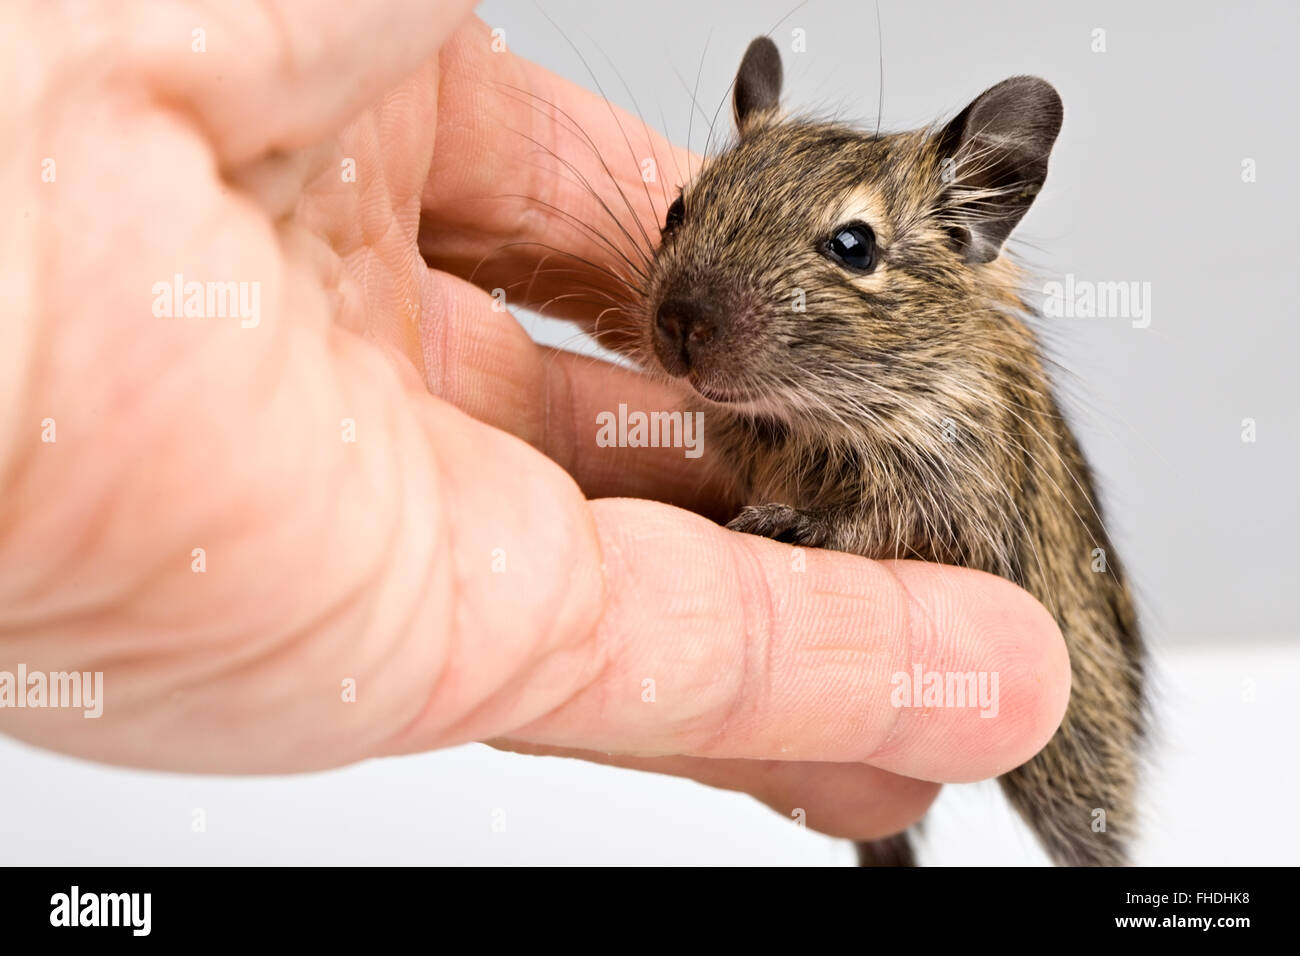 little baby rodent with human hand Stock Photo